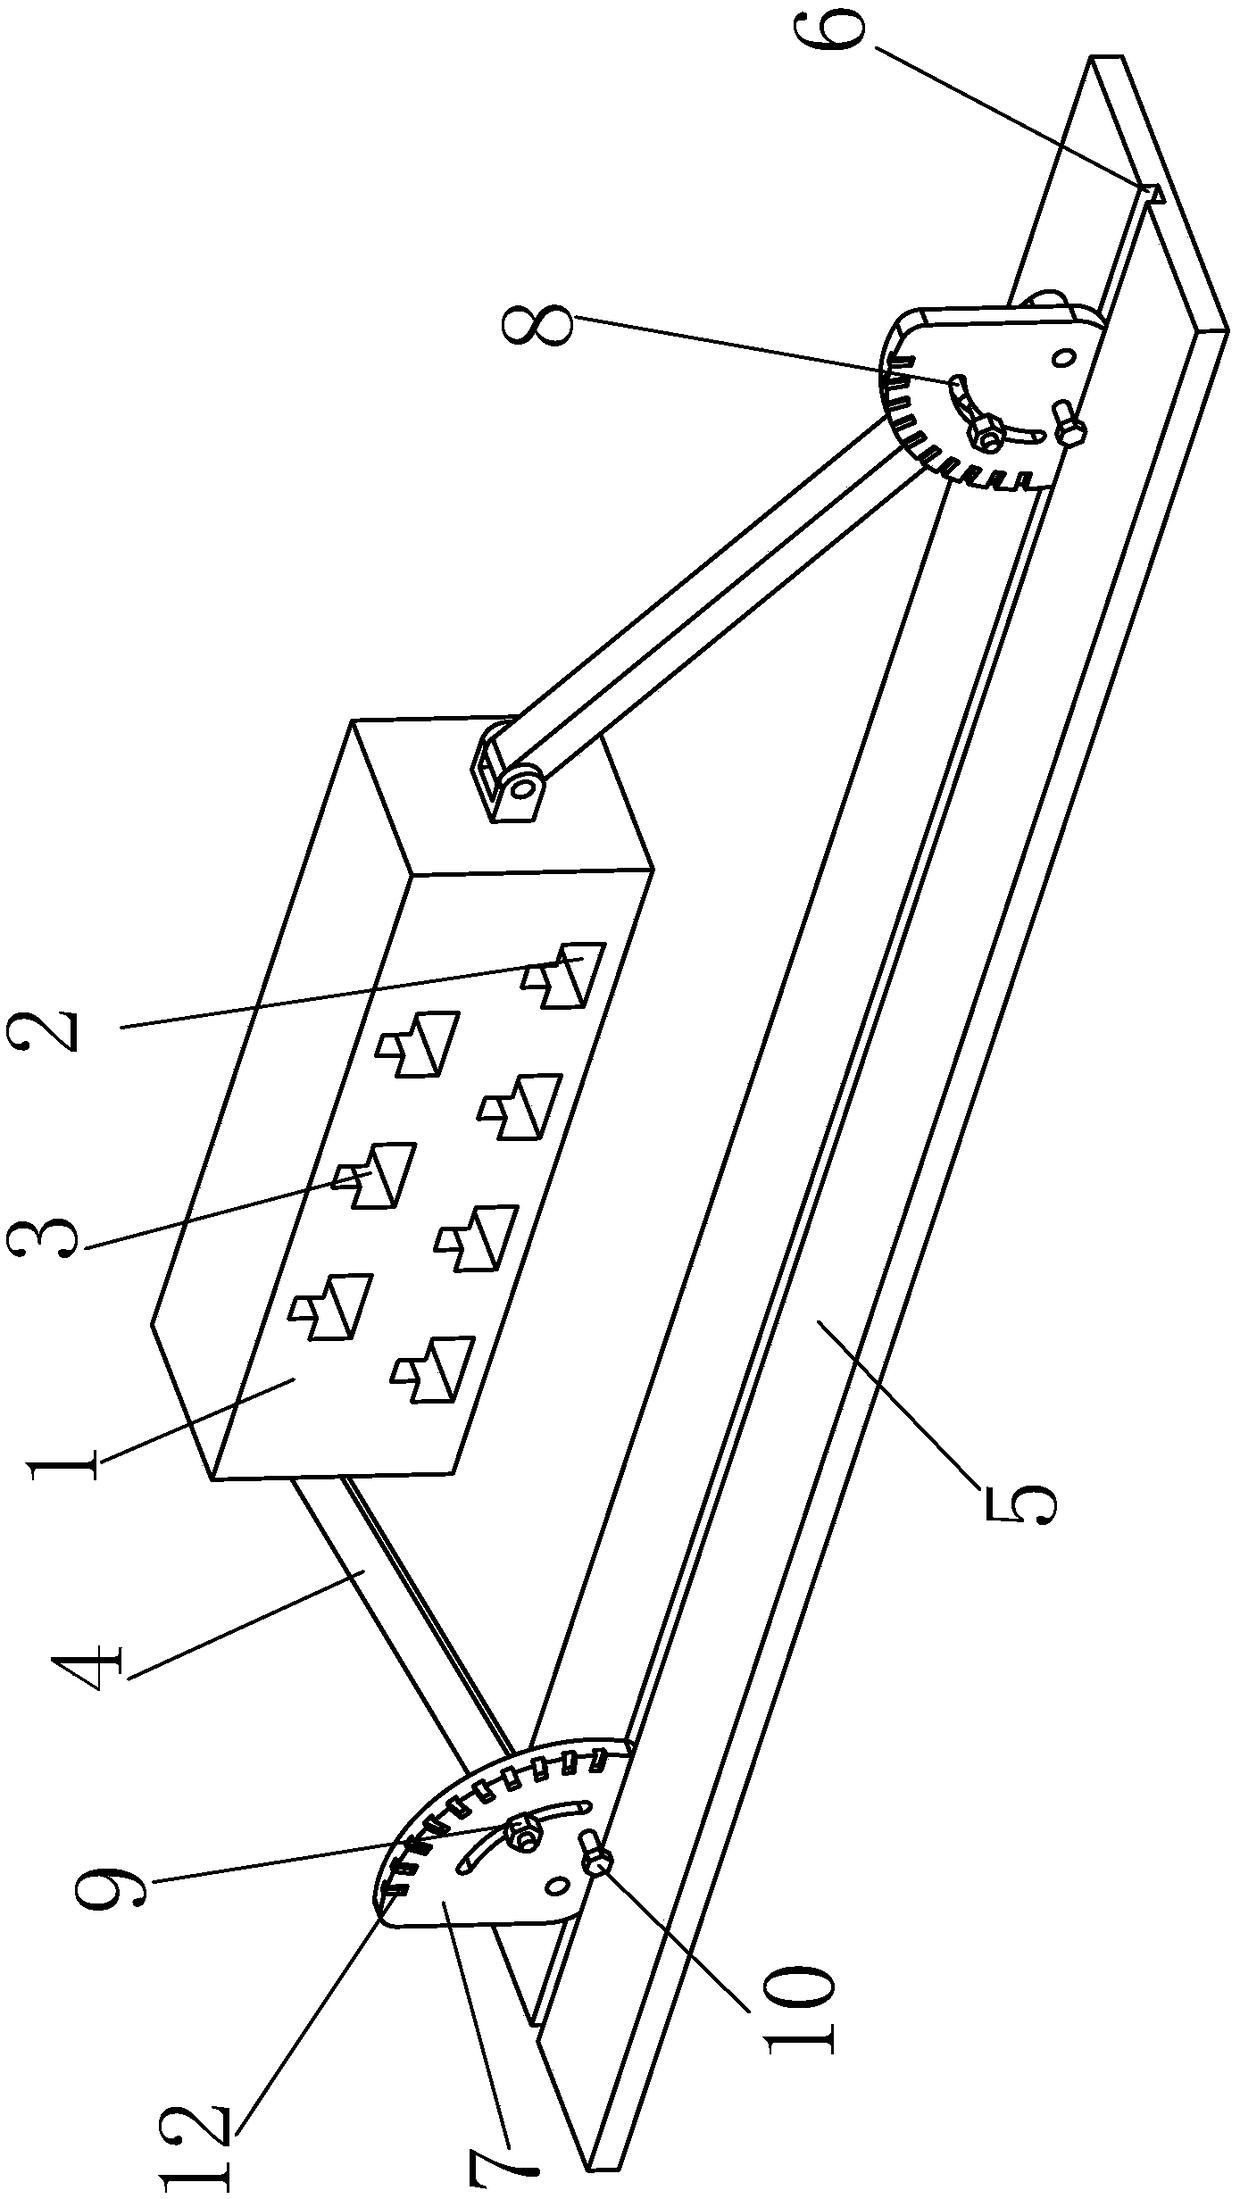 A movable splitter frame for tooth-shaped paper feeding